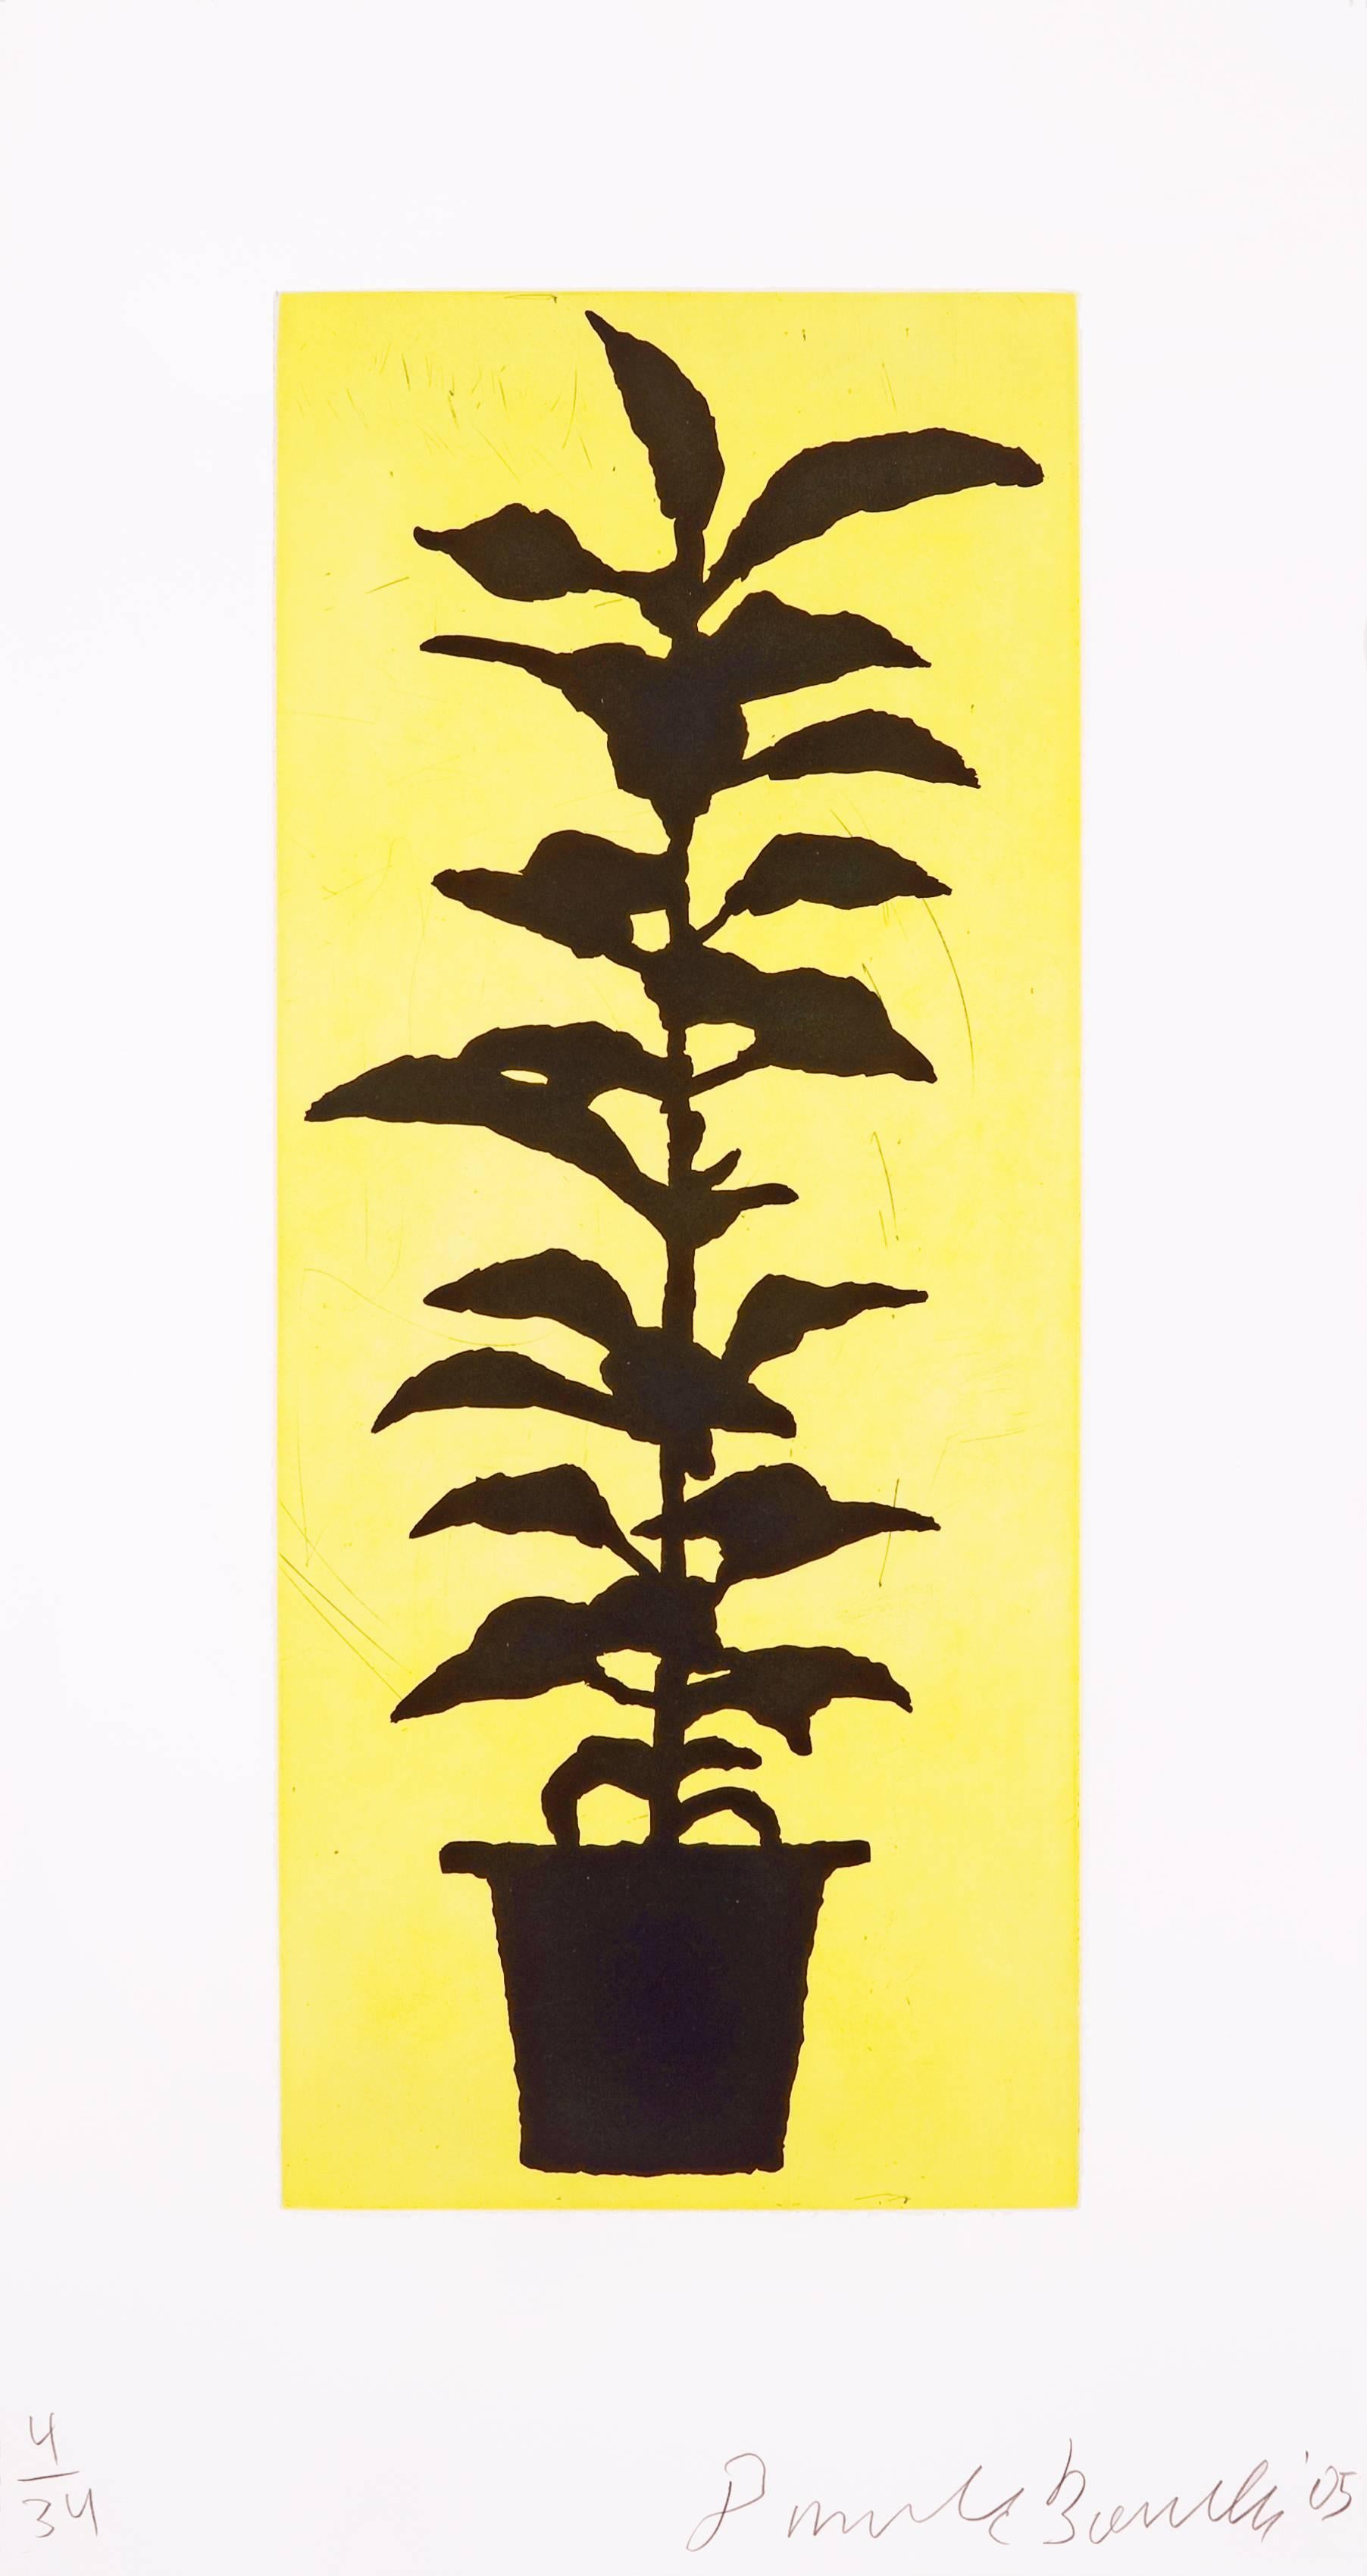 Donald Baechler Abstract Print - Potted Plant